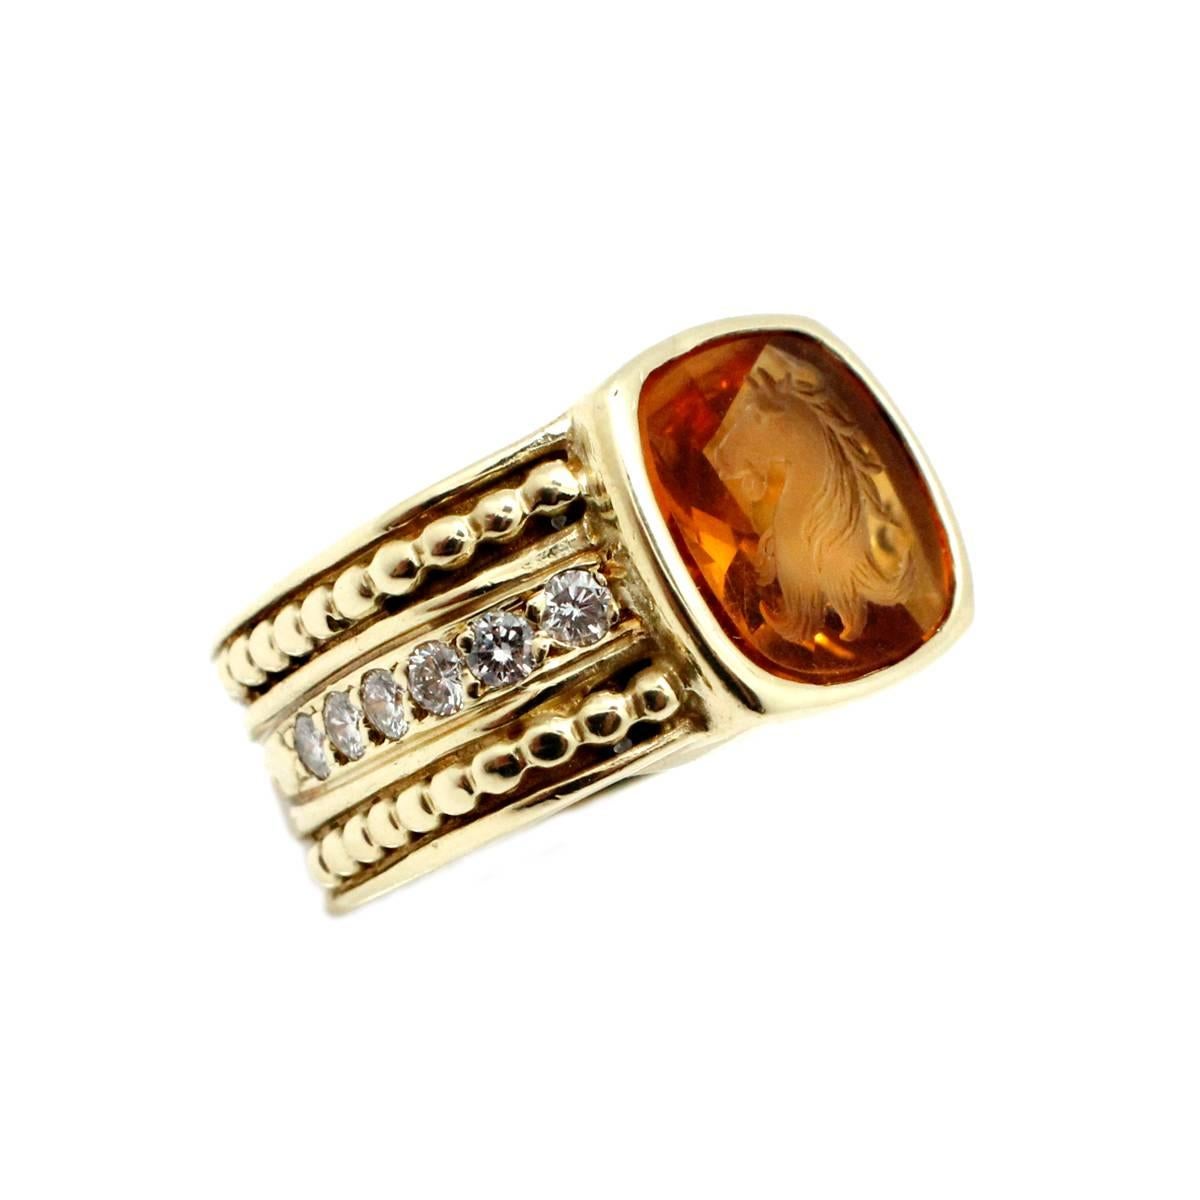 Signed Judith Ripka Intaglio Carved Citrine With Surrounded Diamond Gold Ring In Excellent Condition For Sale In Scottsdale, AZ